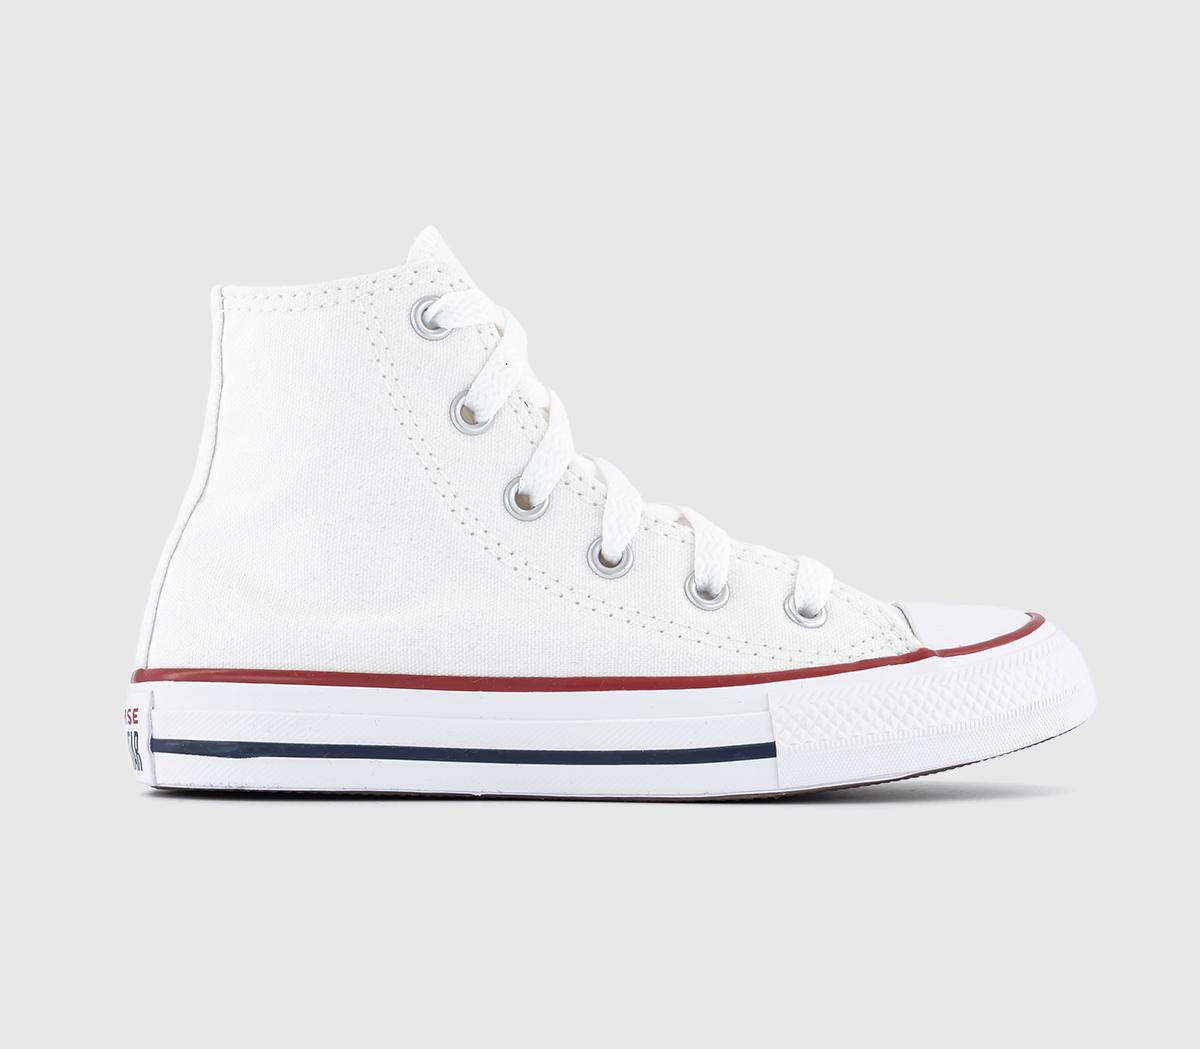 dø Byg op Optøjer Converse All Star Hi Youth Trainers Optical White - Unisex